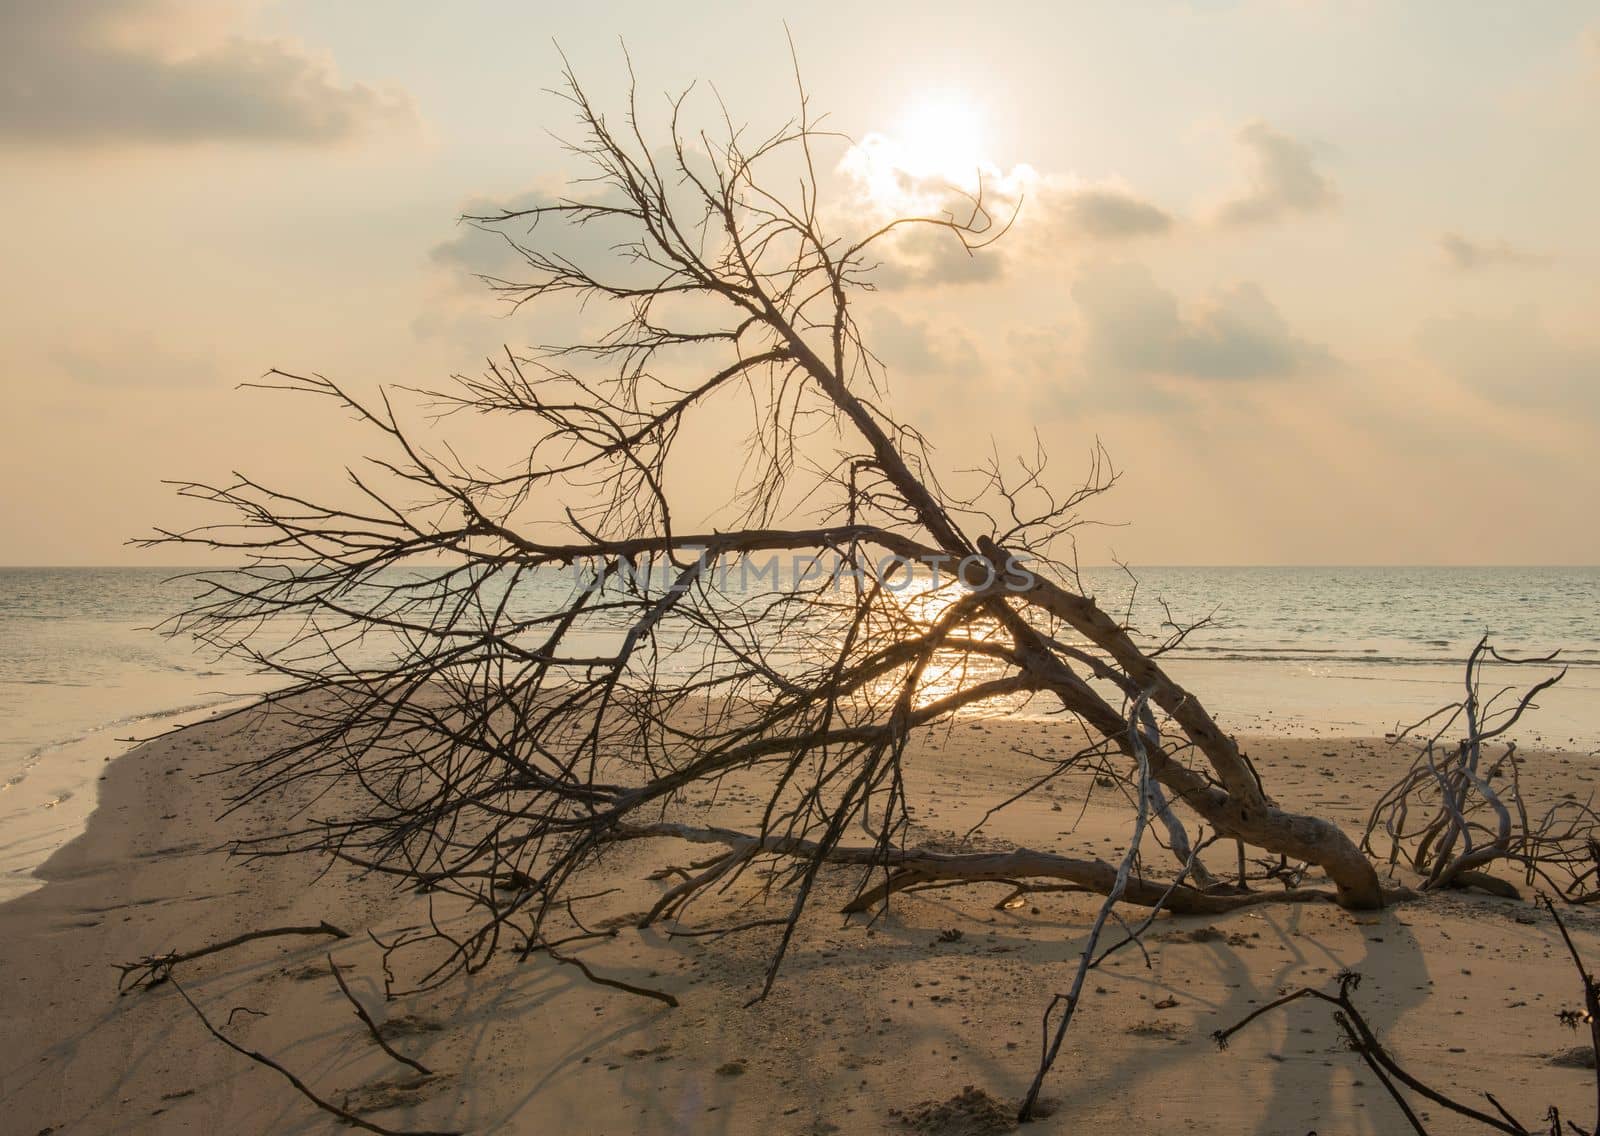 Remote tropical island paradise with beach and dead tree branches wood lying buried and sea landscape background